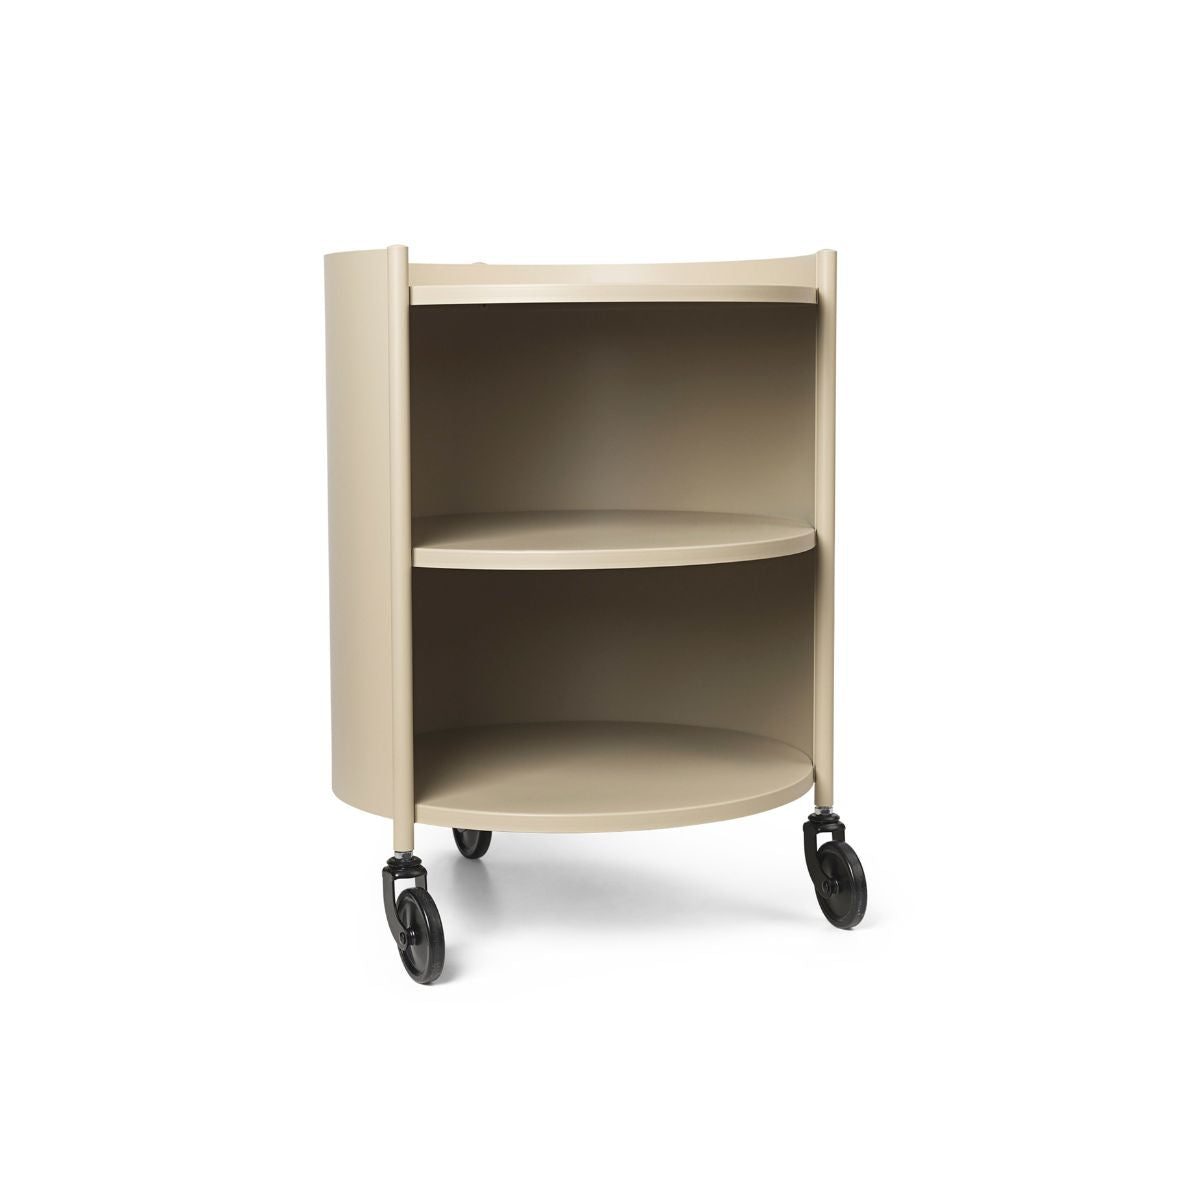 ferm LIVING Eve Storage table. Free UK delivery at someday designs. #colour_cashmere